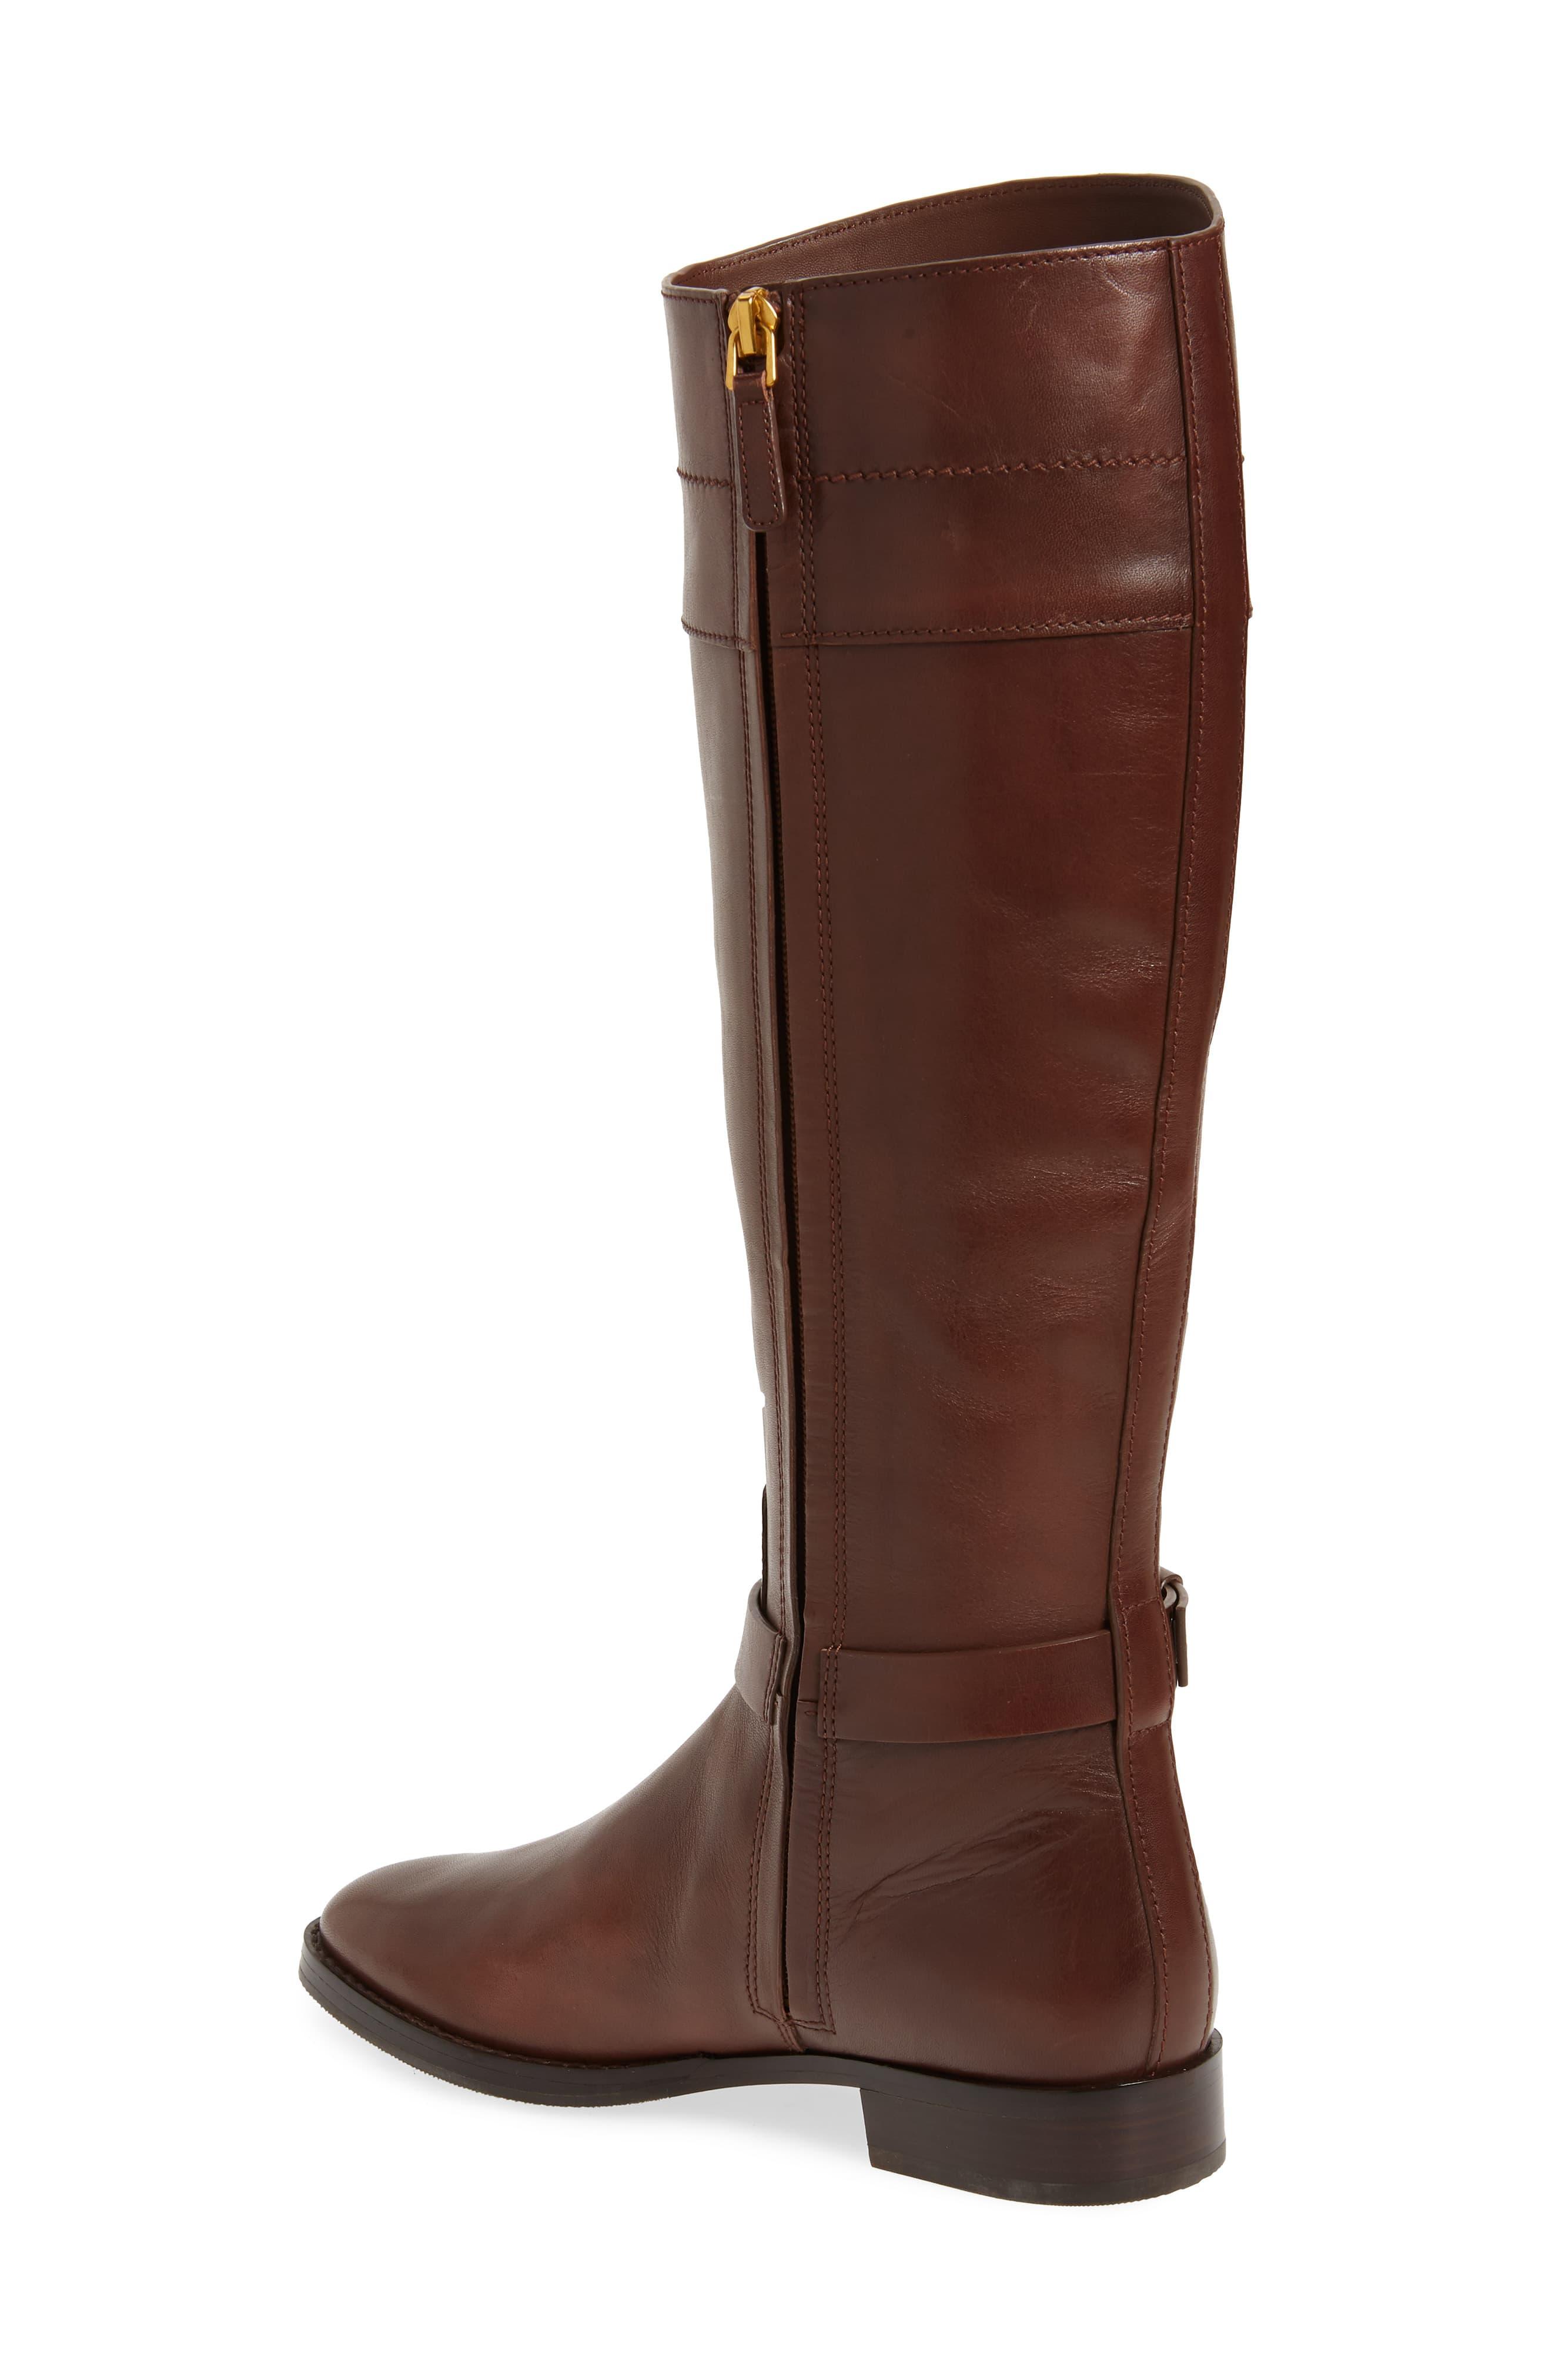 Tory Burch Leather Everly Knee High 